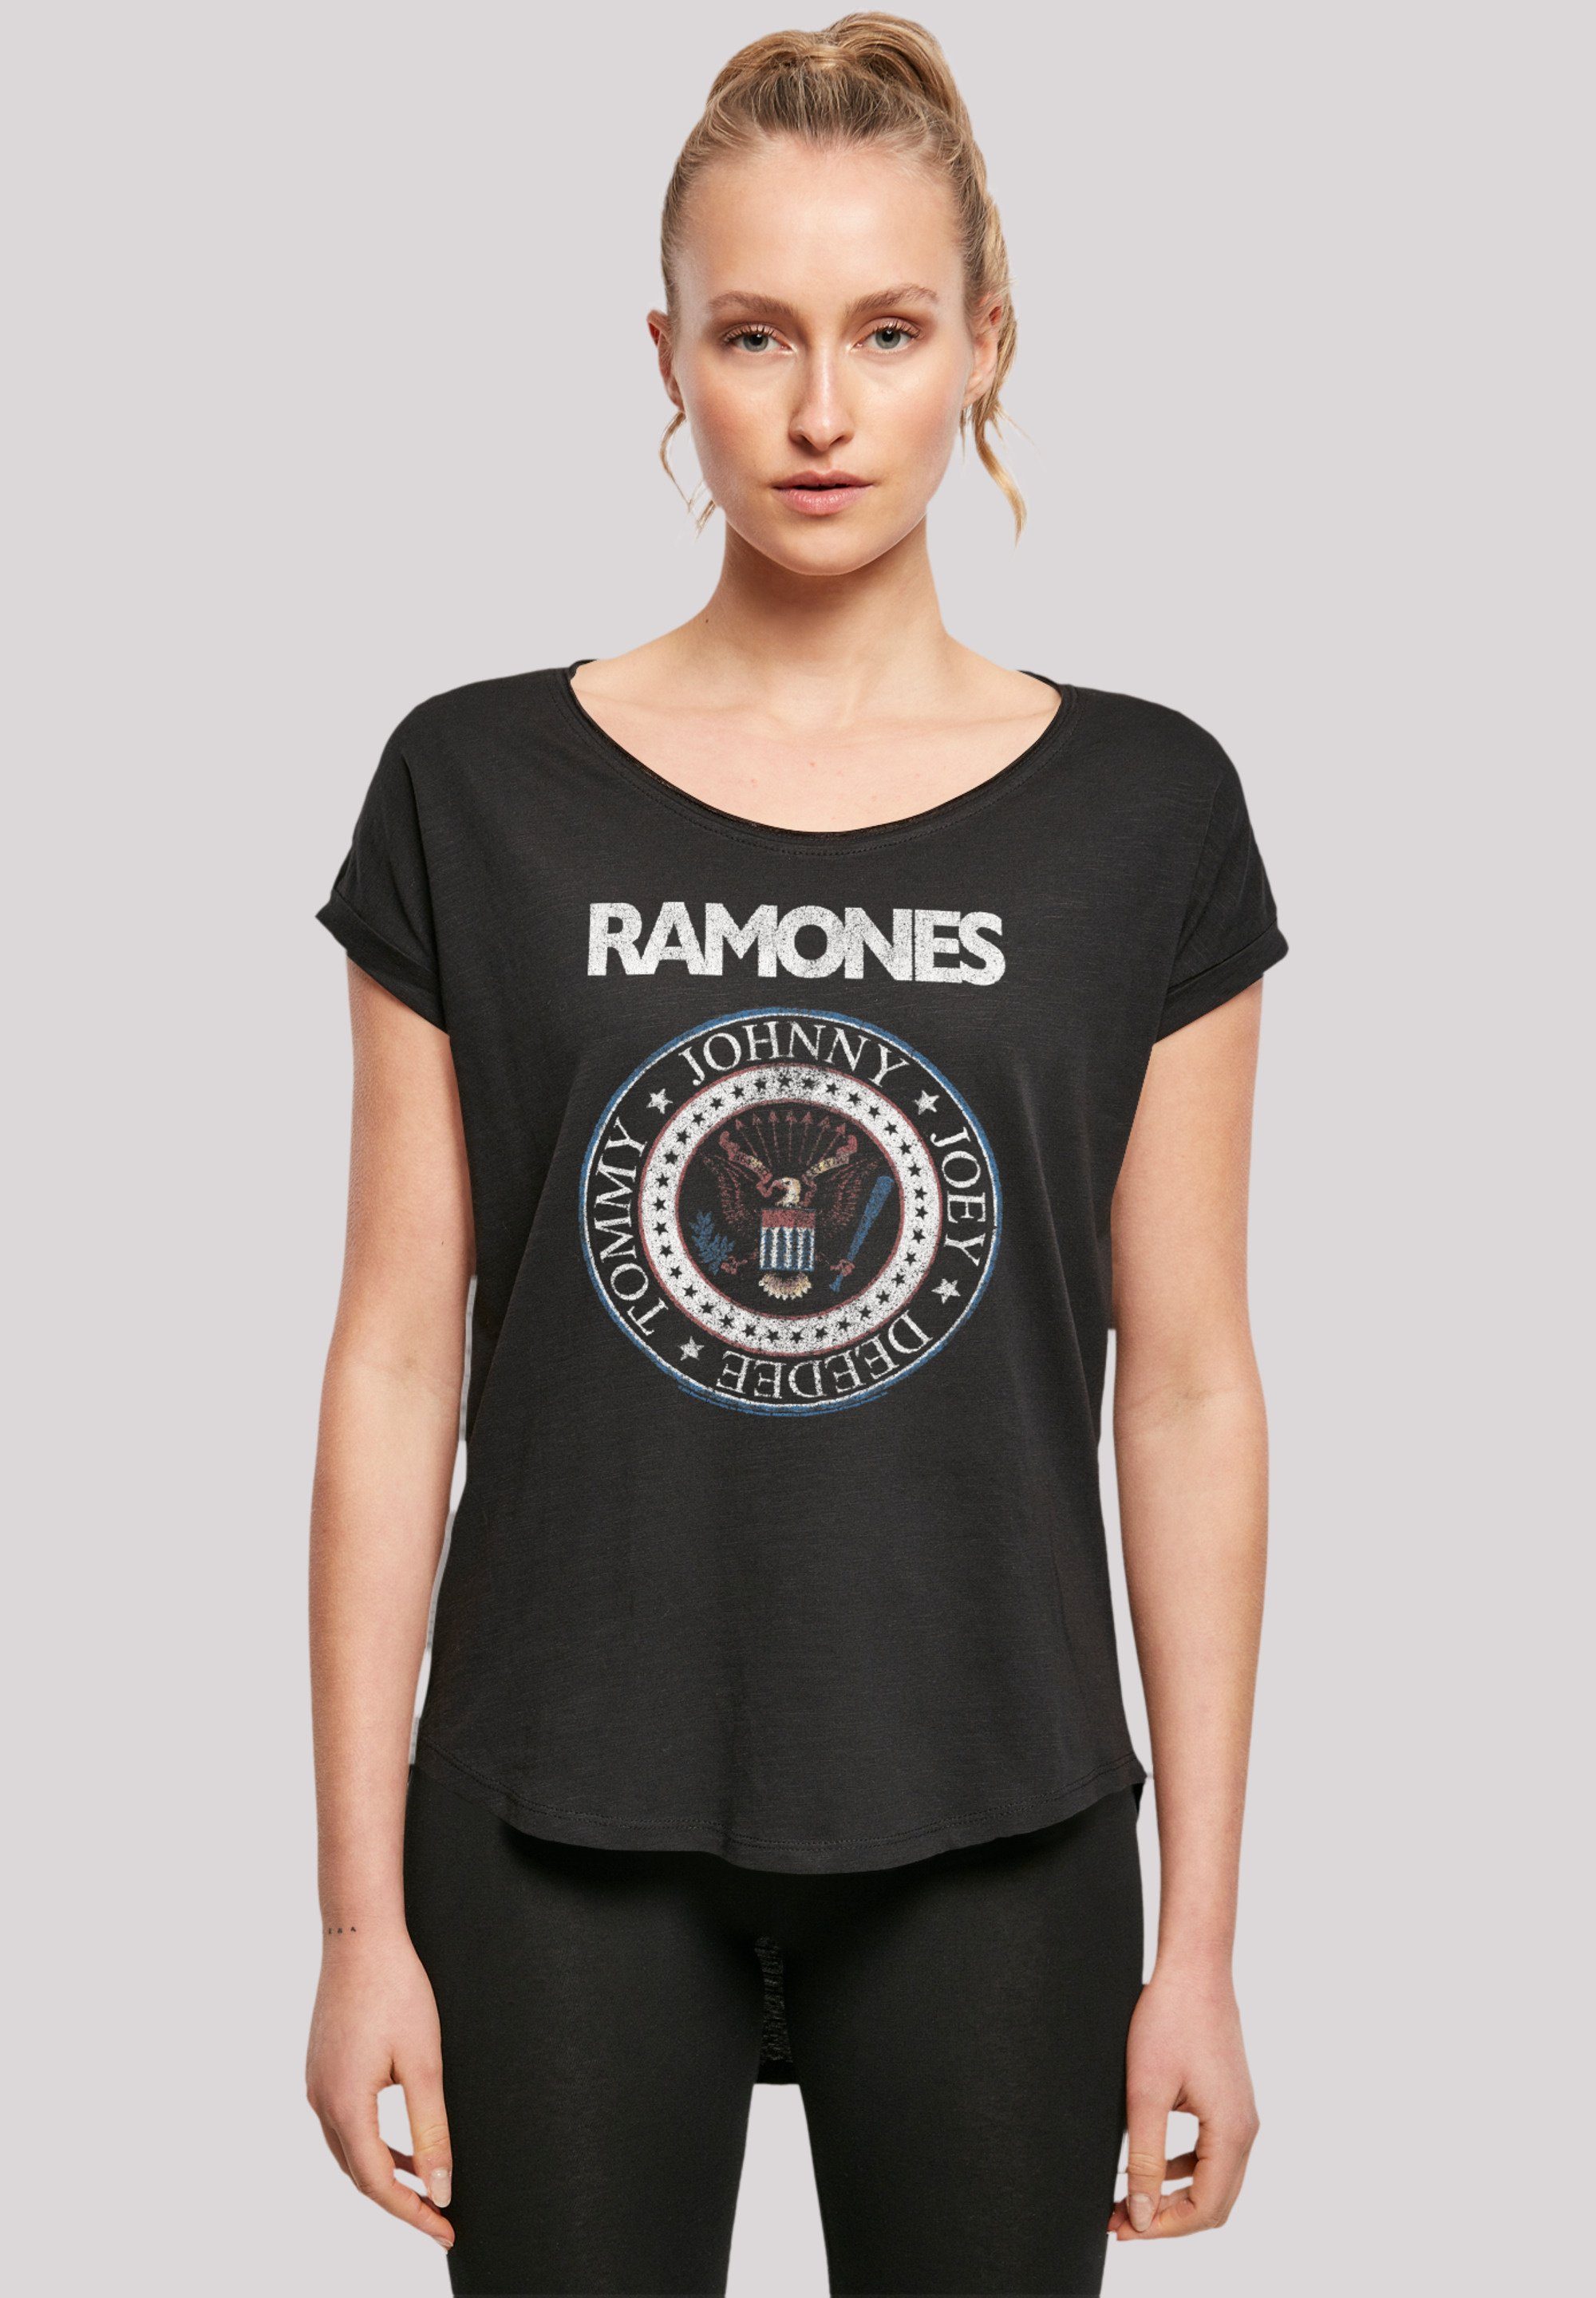 F4NT4STIC T-Shirt Ramones Rock Musik Band Red White And Seal Premium Qualität, Band, Rock-Musik